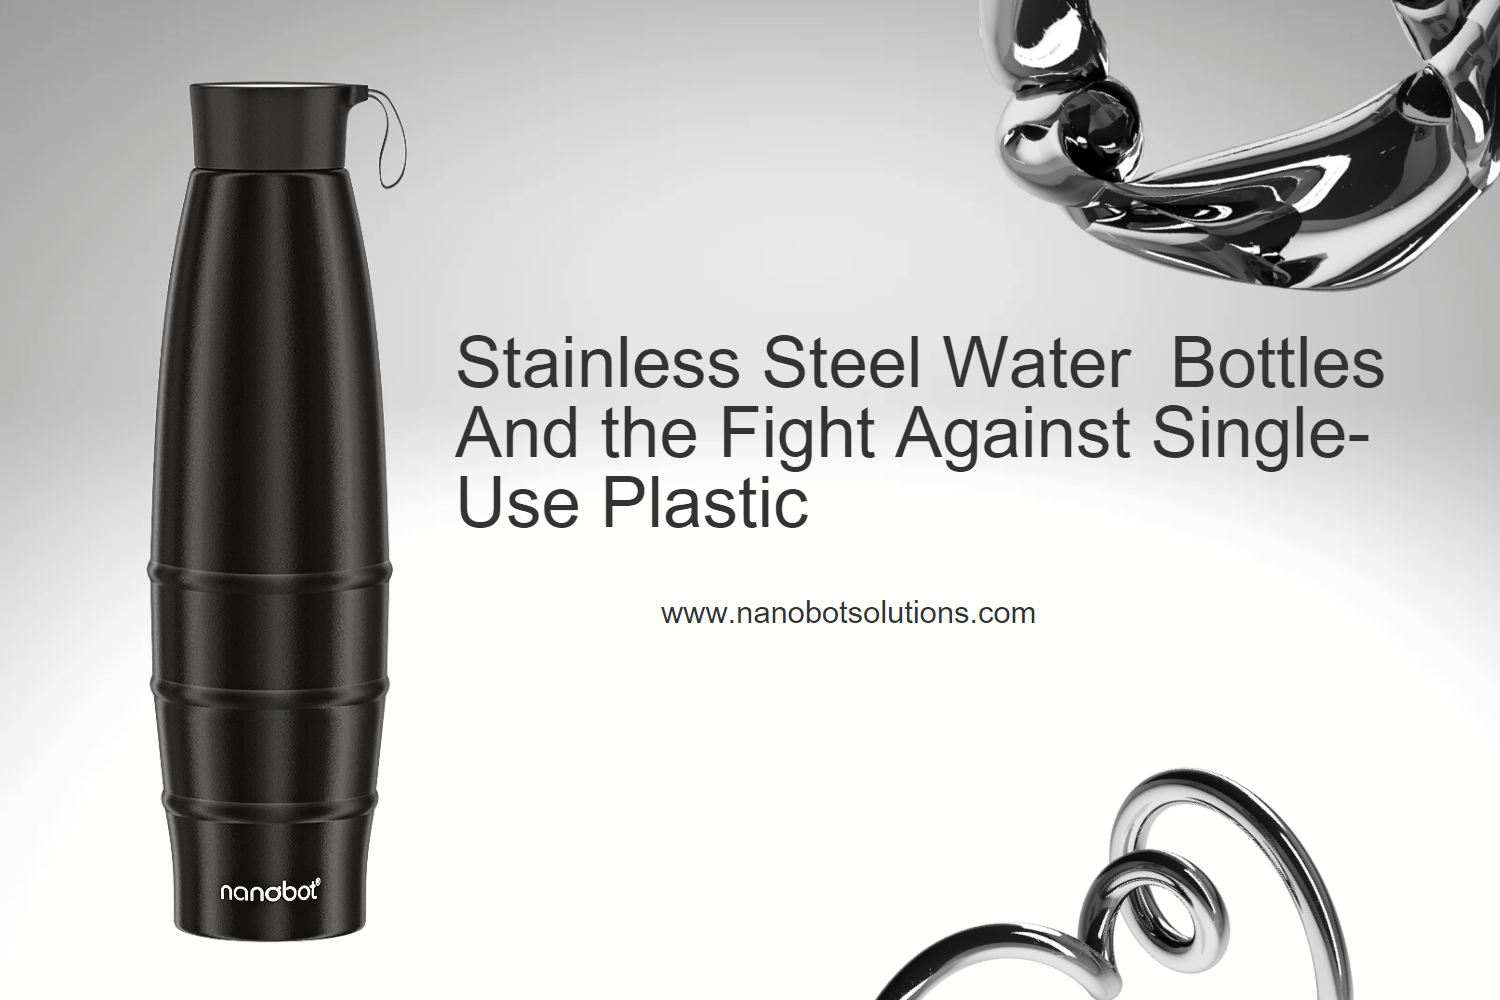 Stainless Steel Water Bottles and the Fight Against Single-Use Plastic